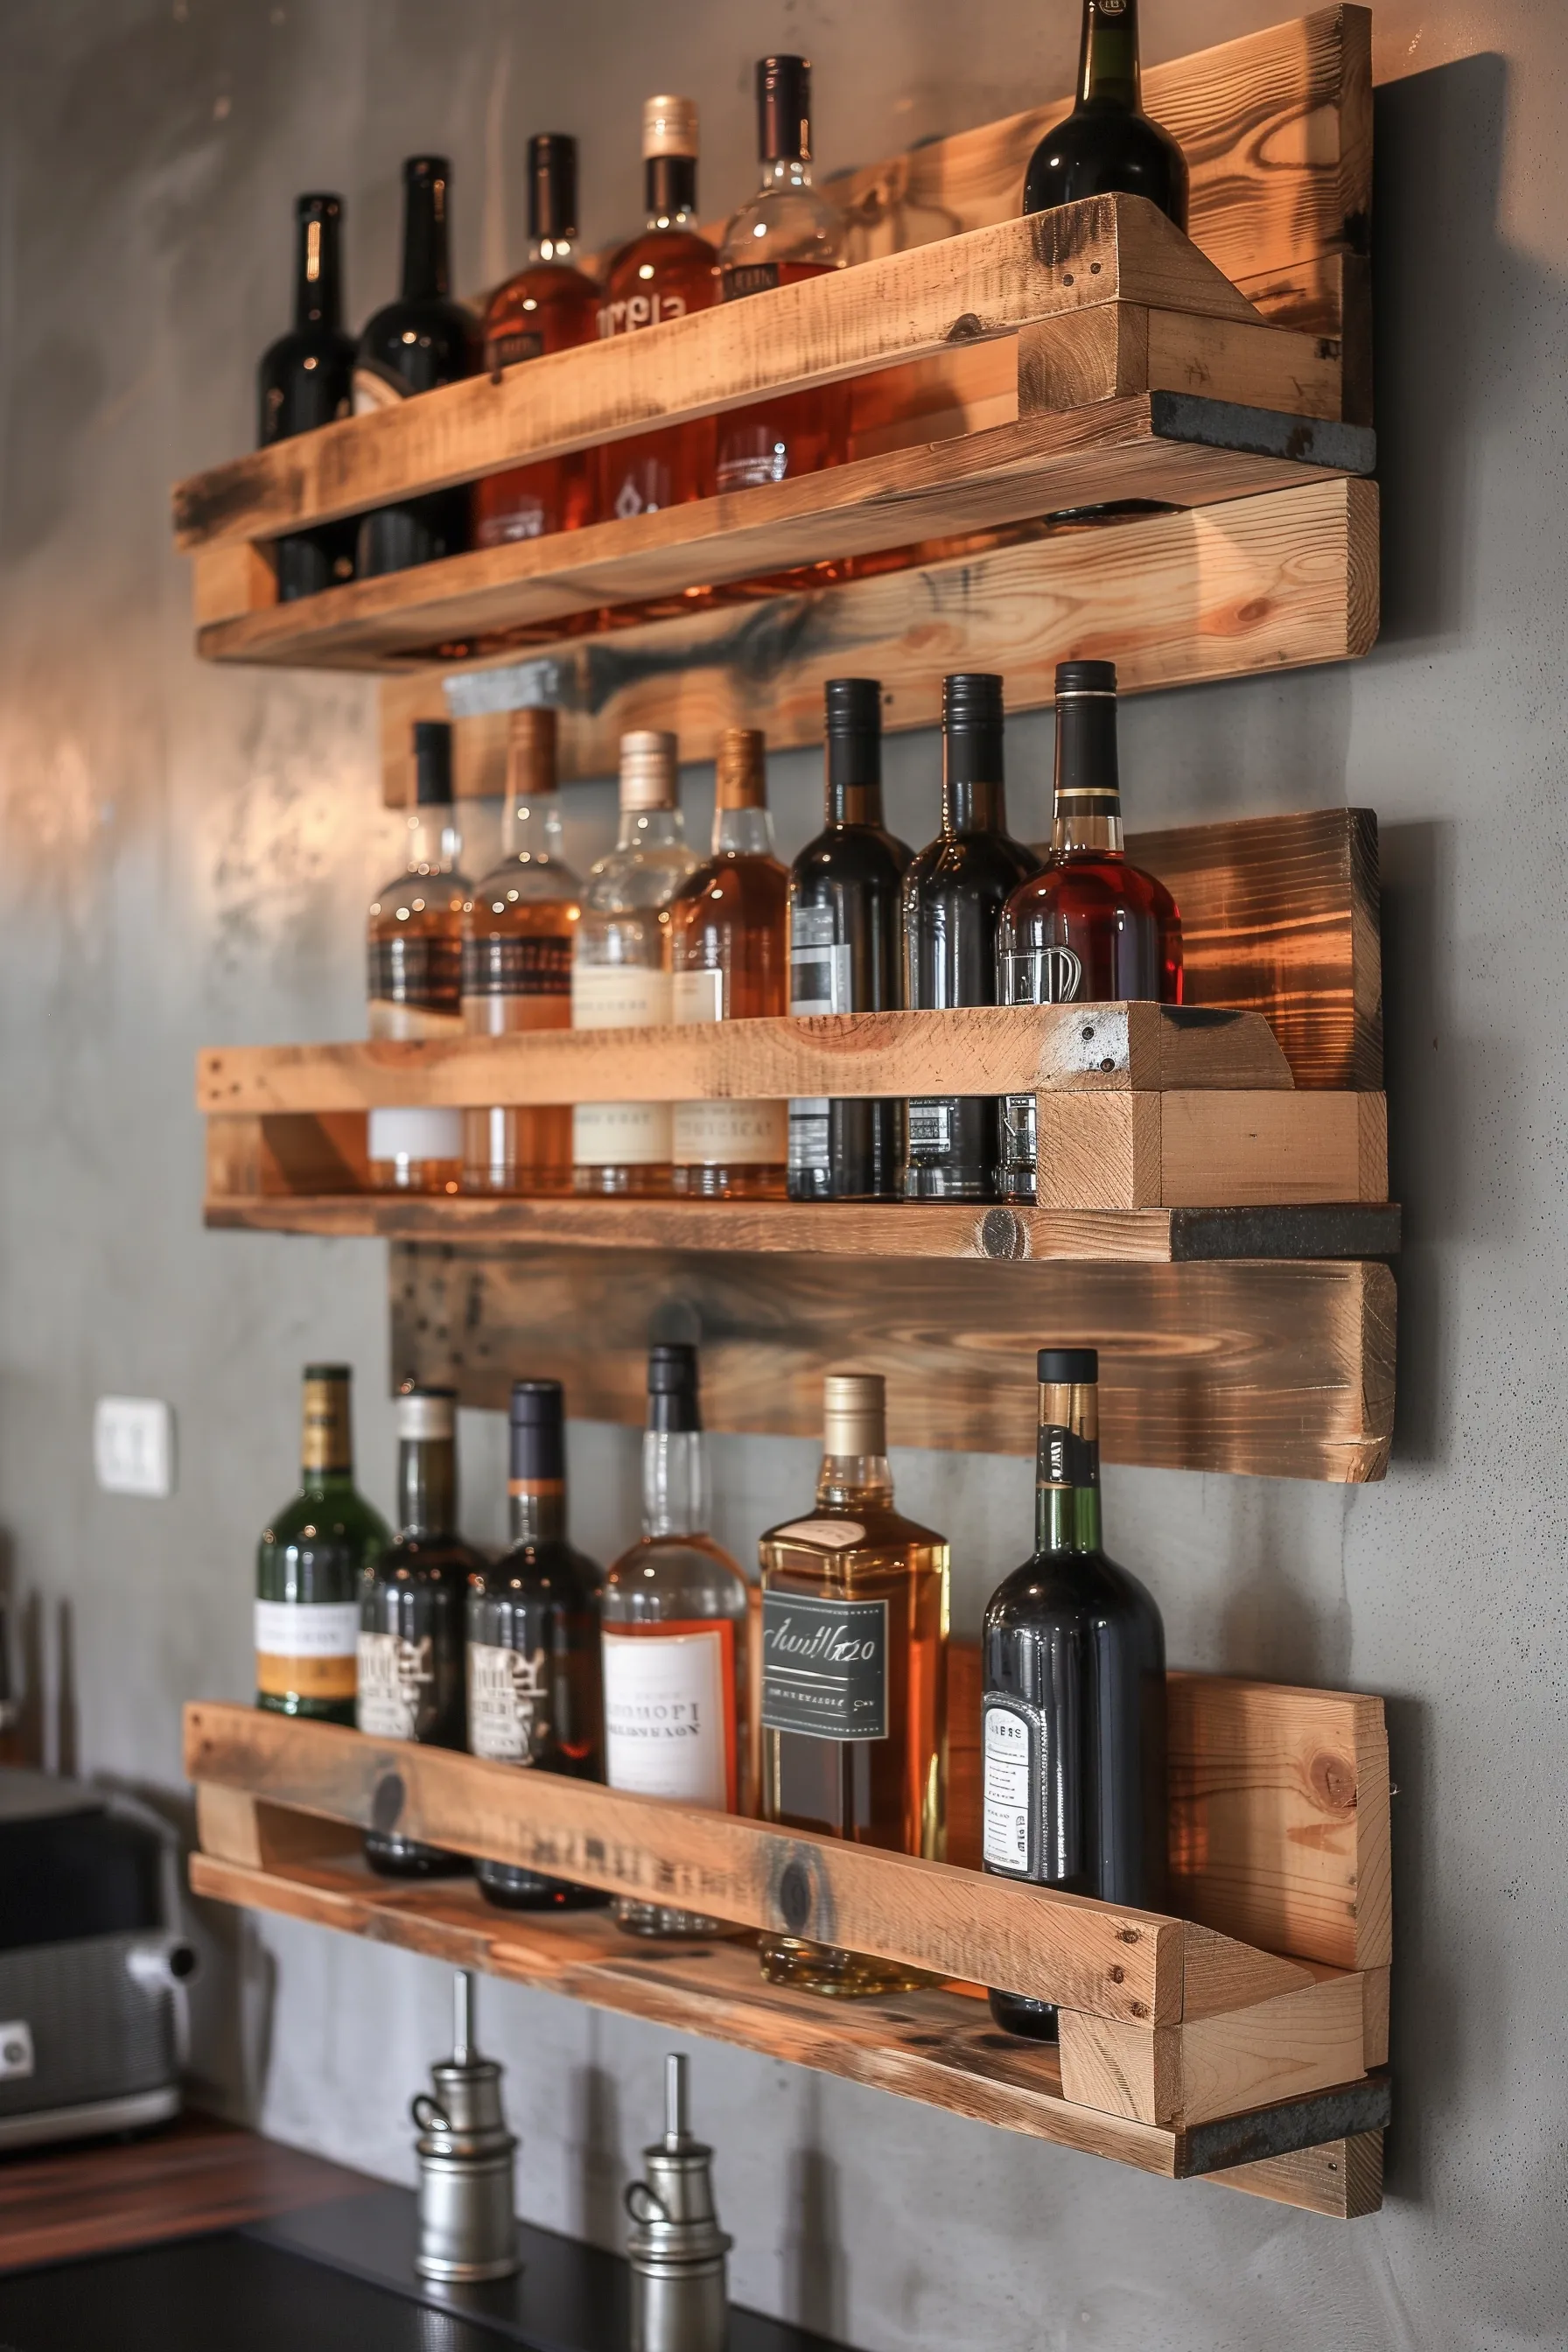 Rustic pallet bar shelves made out of pallets.